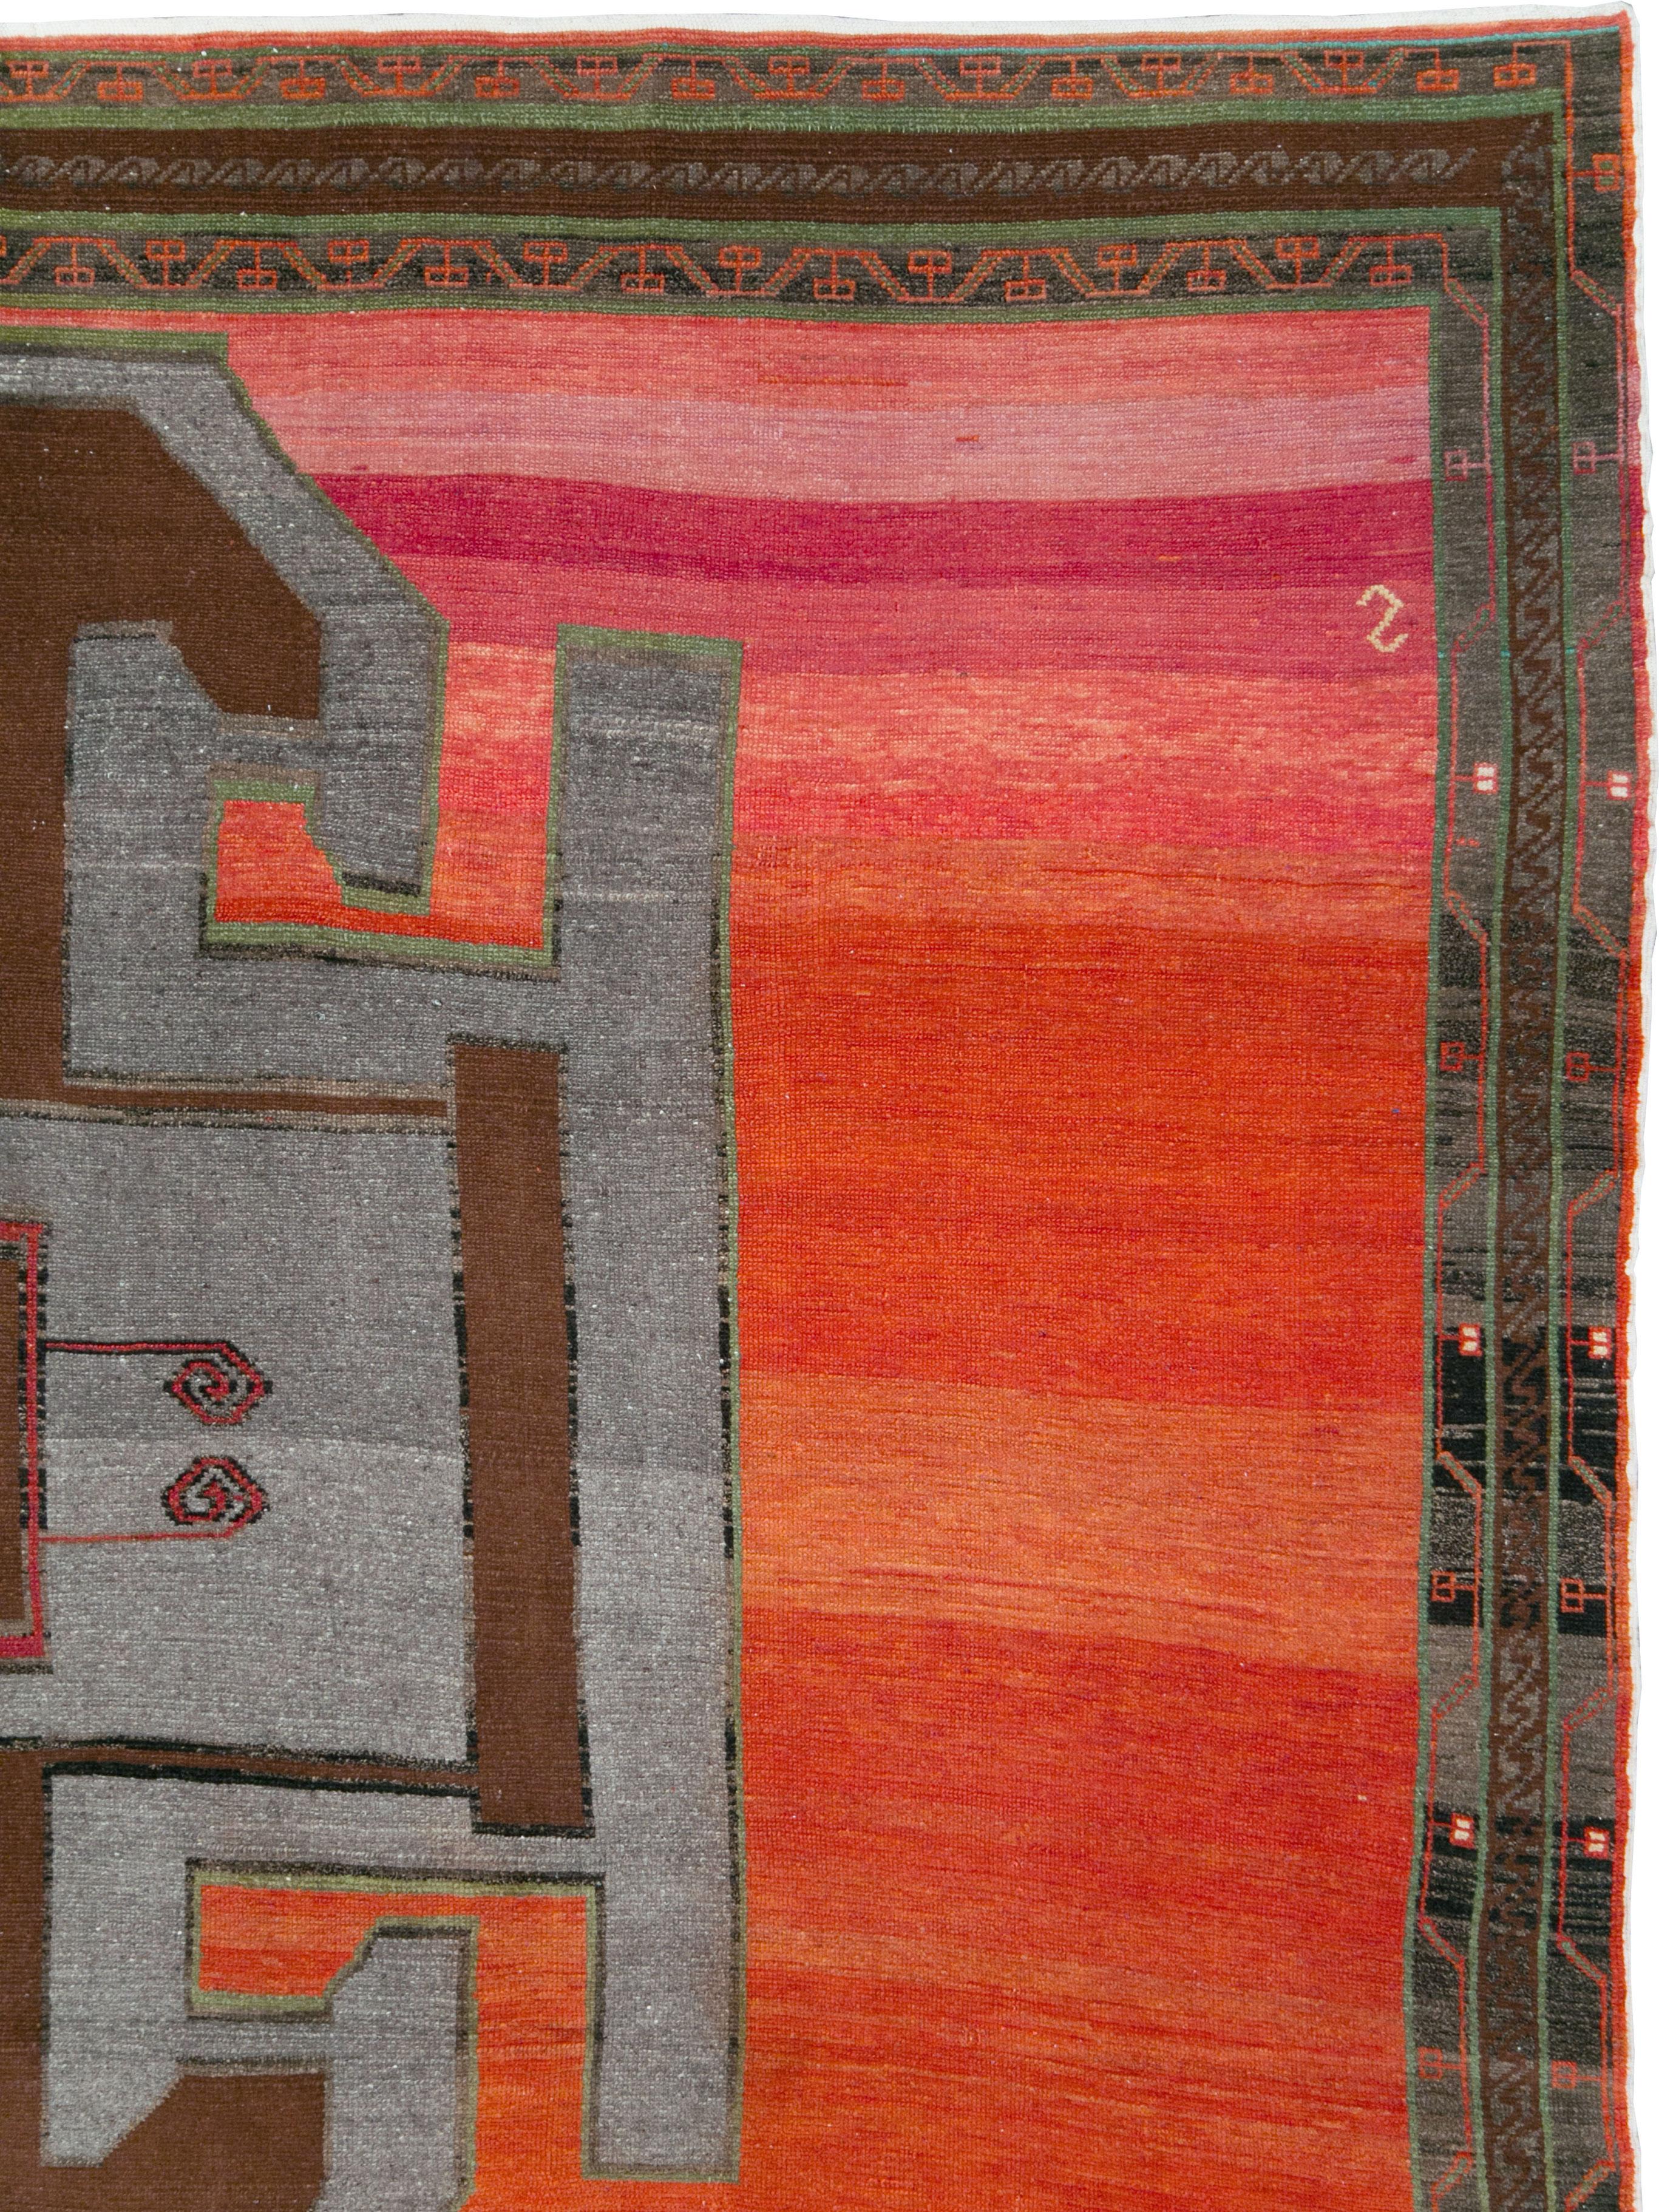 Tribal Mid-20th Century Handmade Turkish Anatolian Square Room Size Carpet In Good Condition For Sale In New York, NY